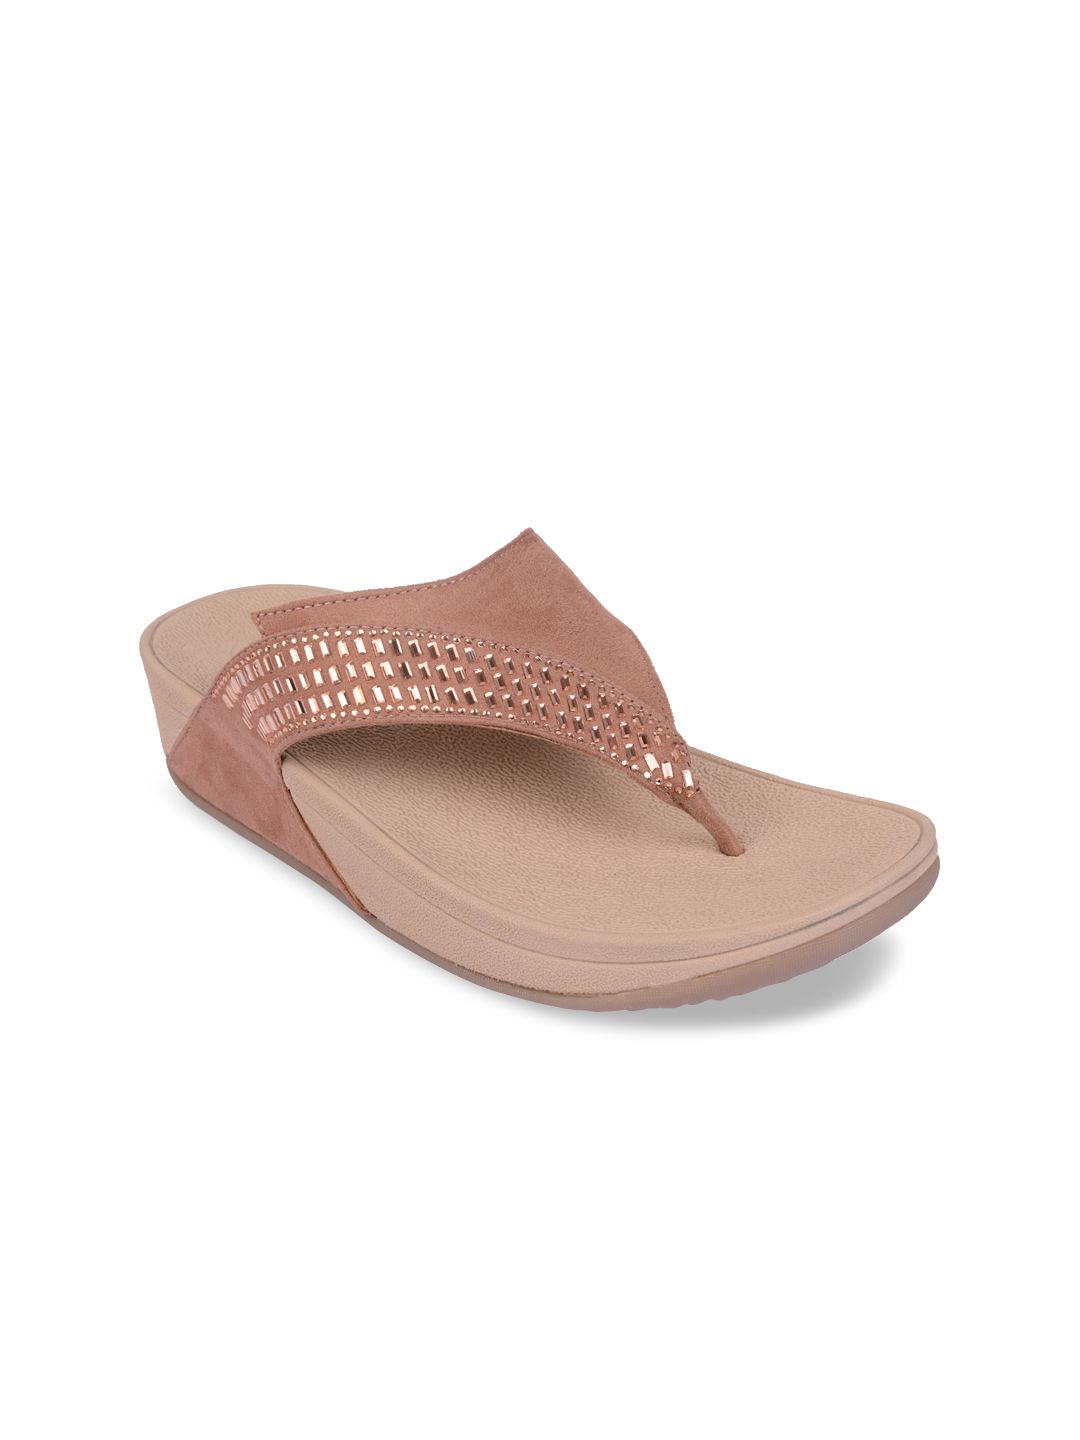 Rocia Women Pink Embellished Open Toe Flats Price in India